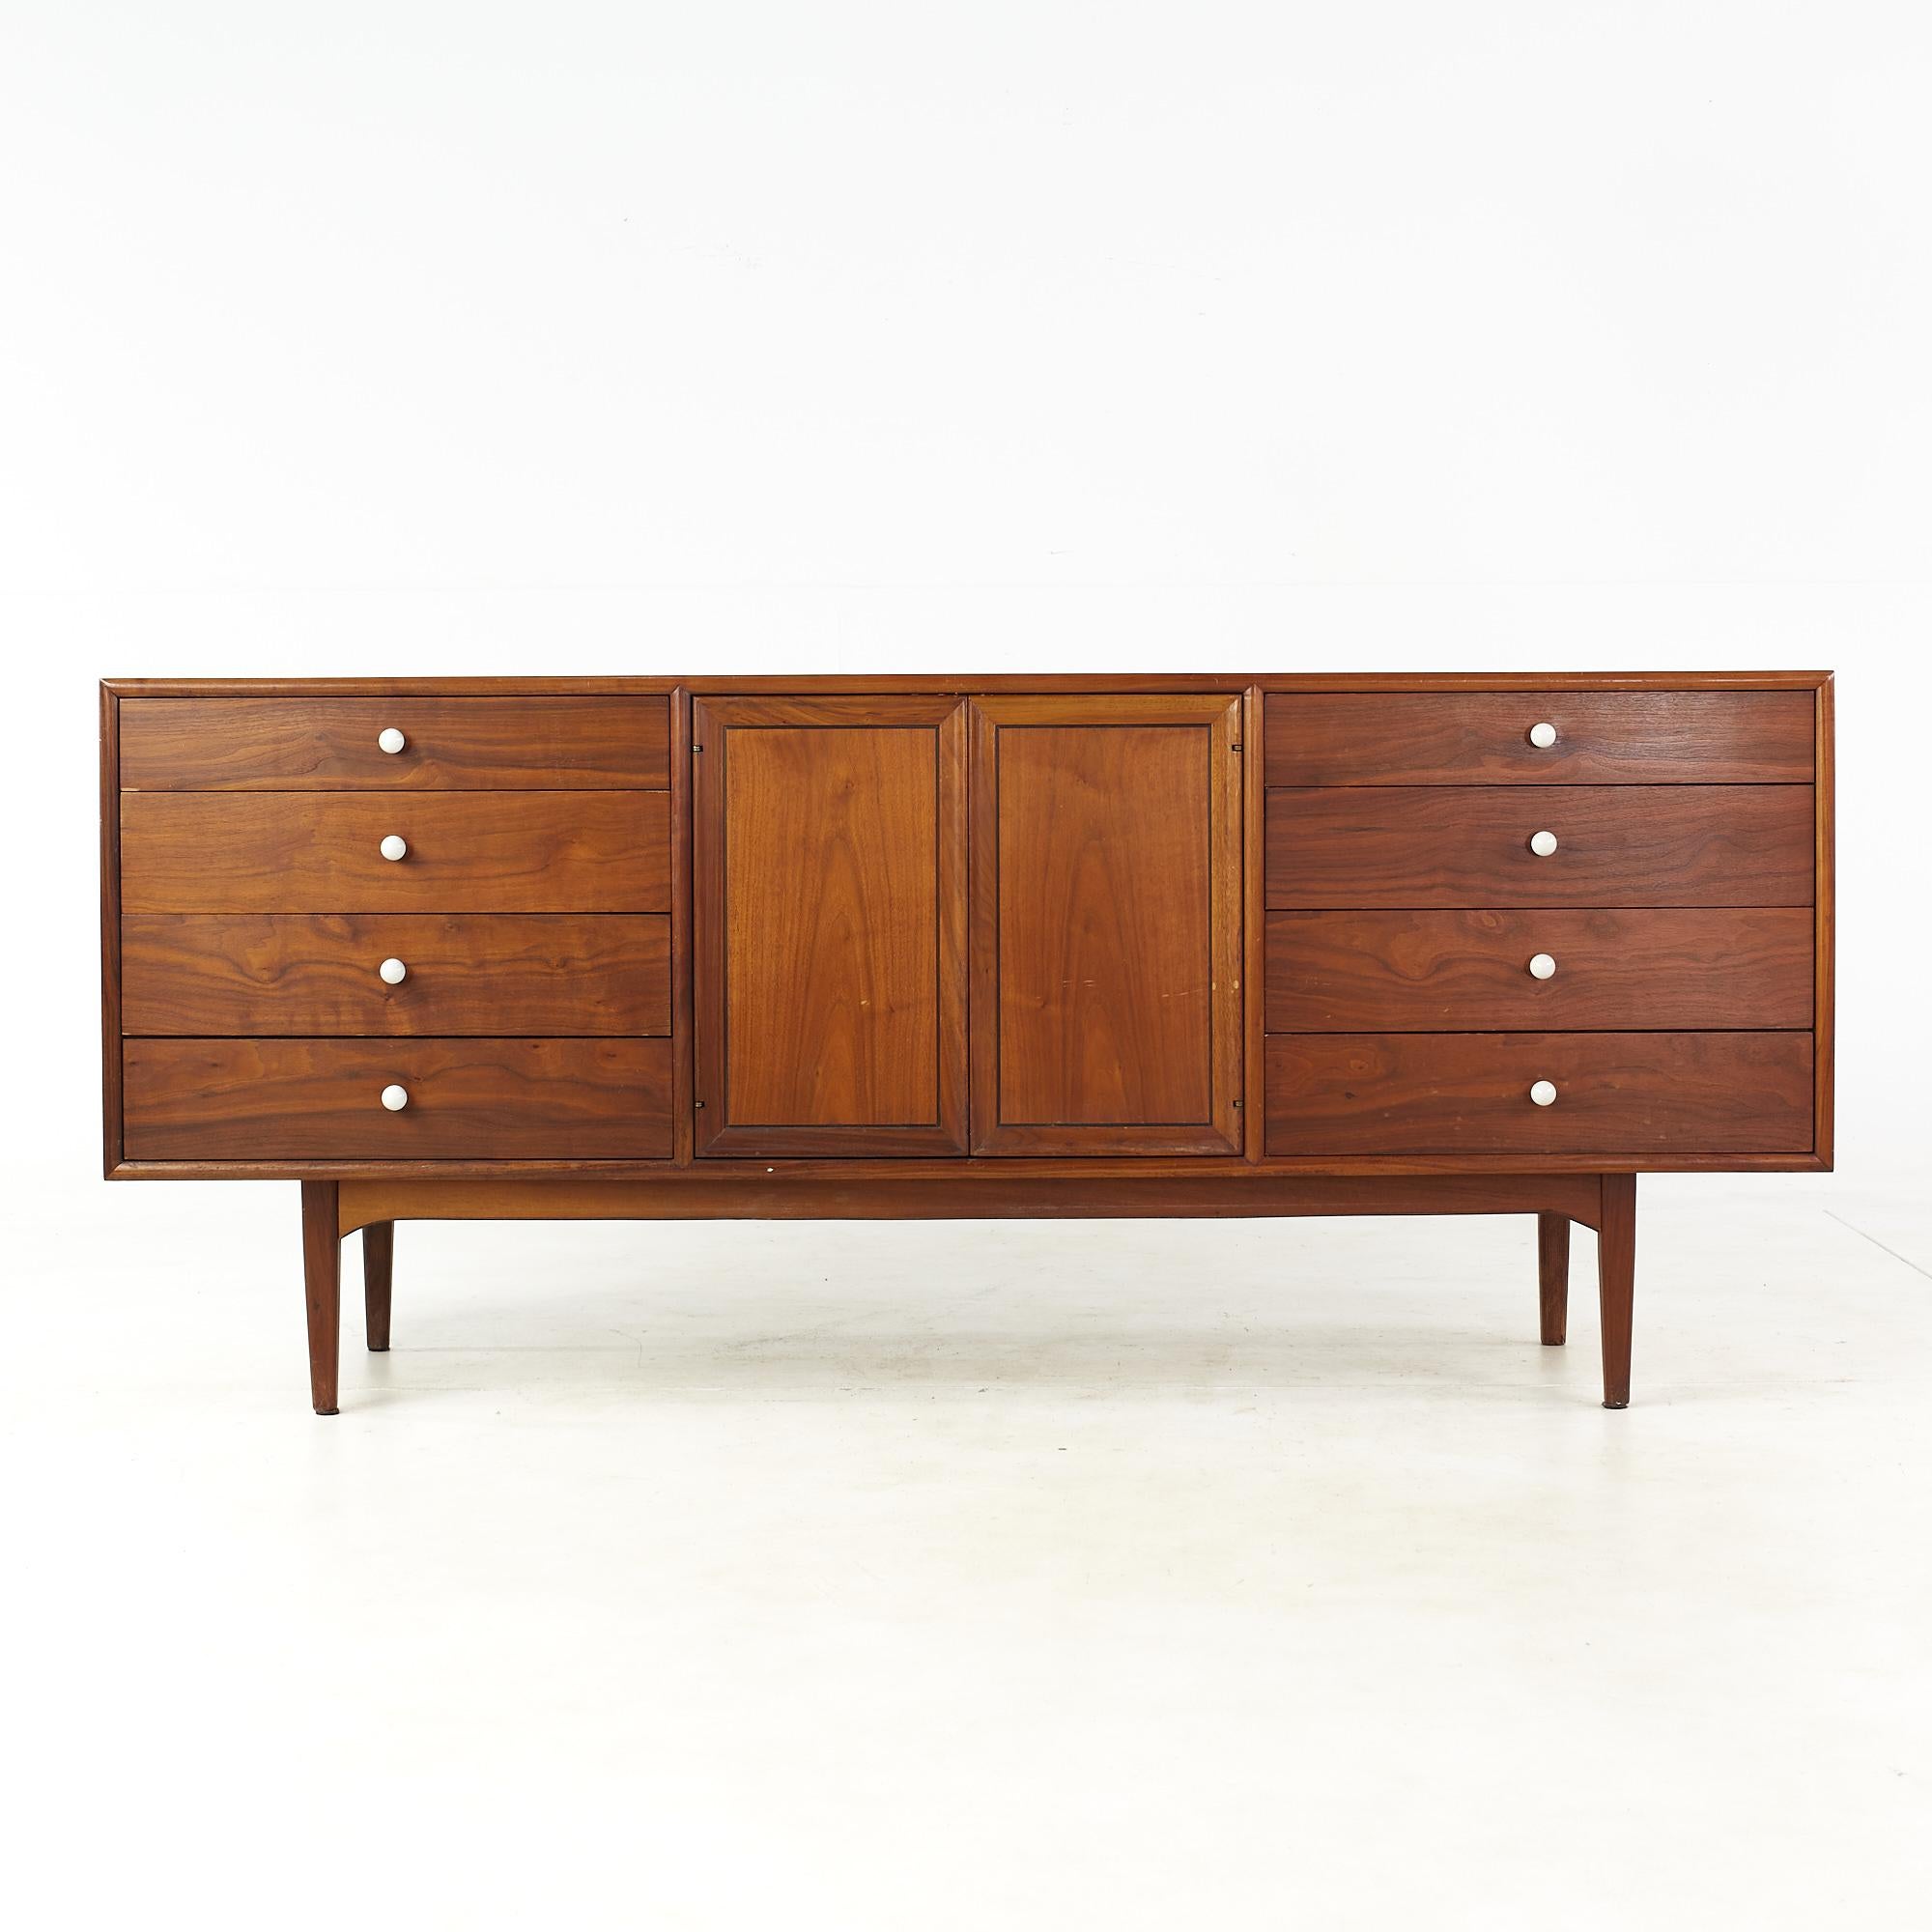 Kipp Stewart for Drexel Declaration Mid Century 11 Drawer Lowboy Dresser

This dresser measures: 72.75 wide x 20 deep x 31.25 inches high

All pieces of furniture can be had in what we call restored vintage condition. That means the piece is